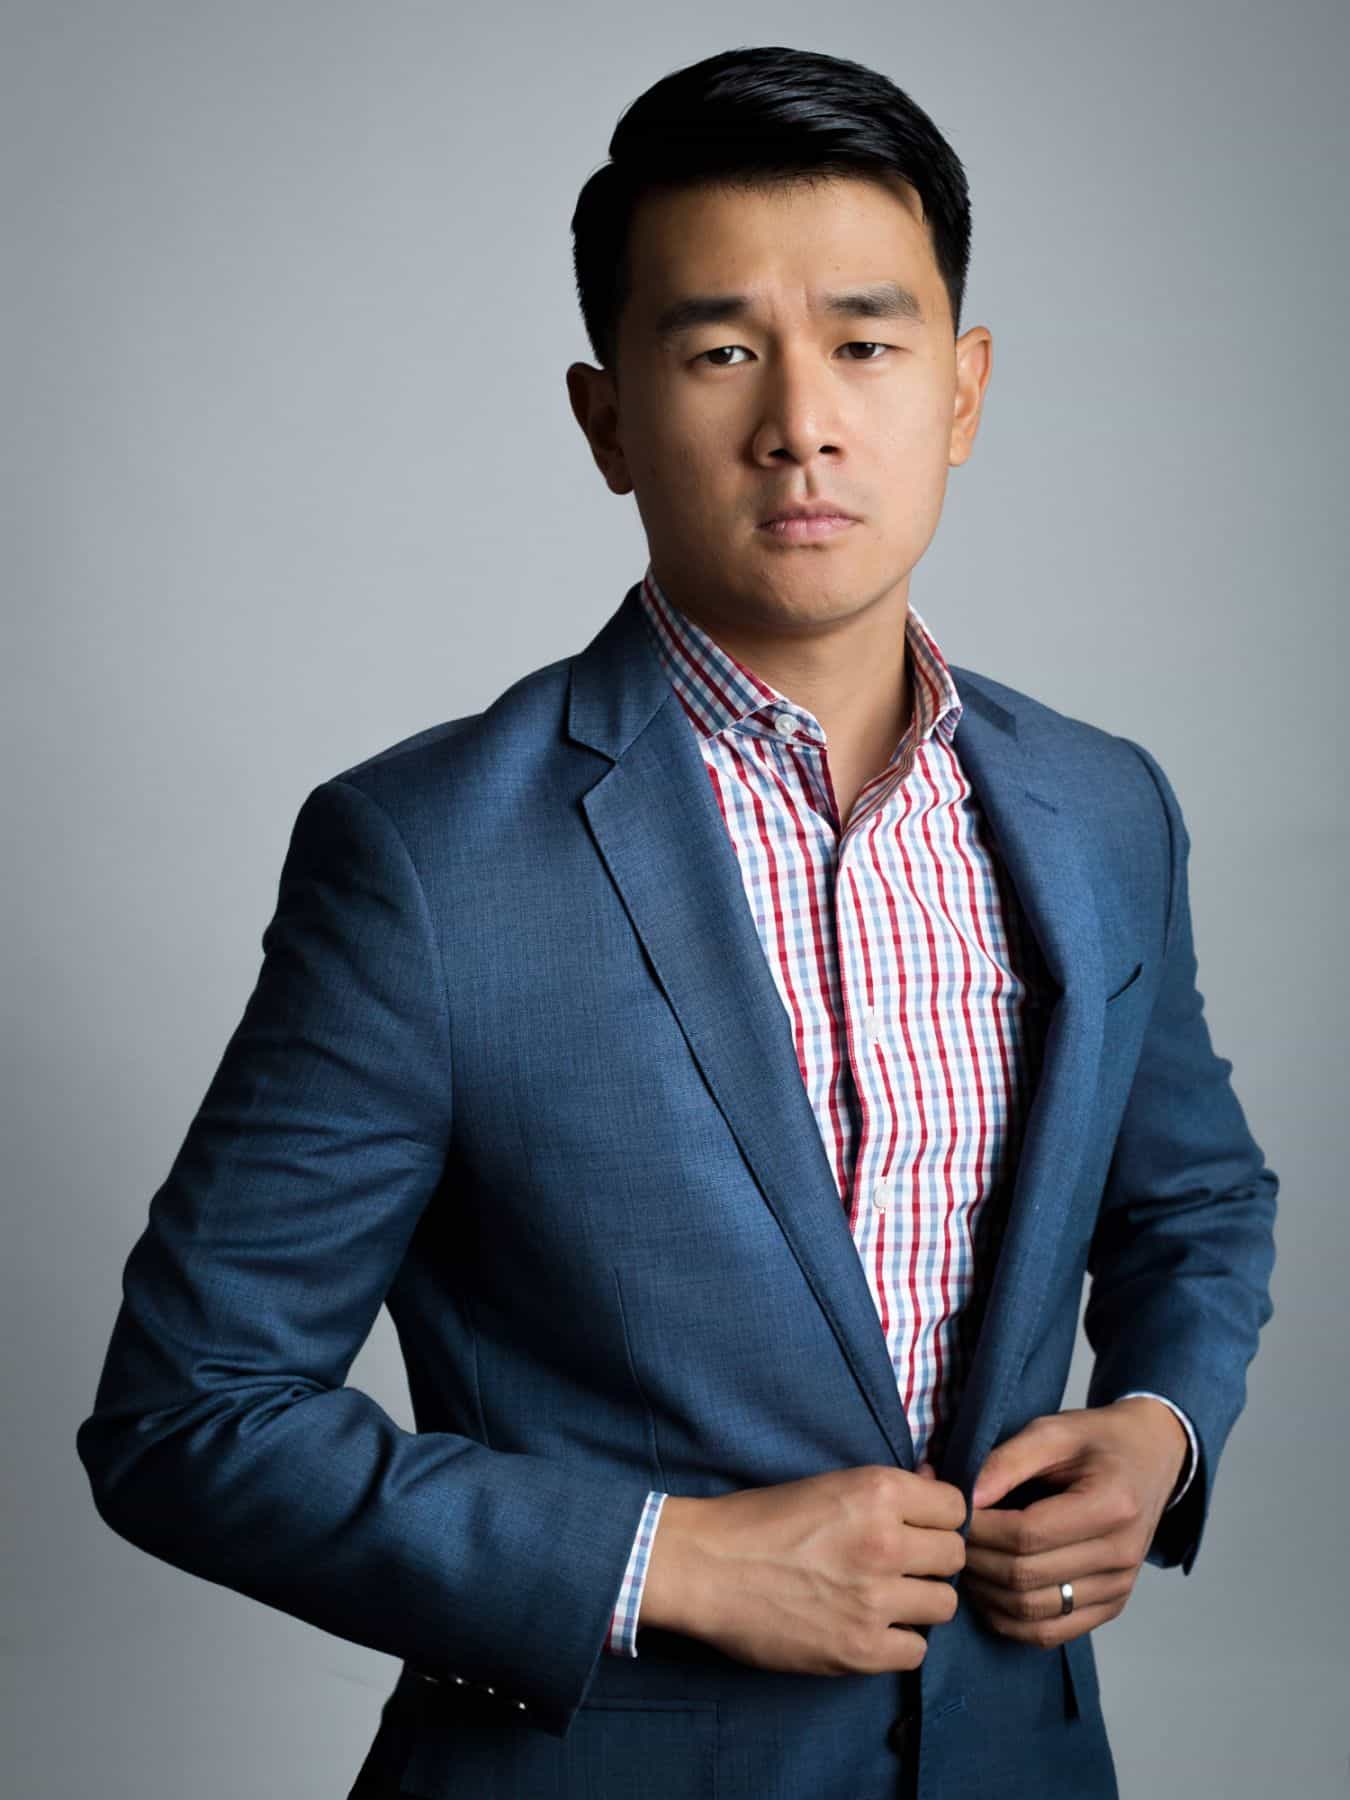 How rich is Ronny Chieng?